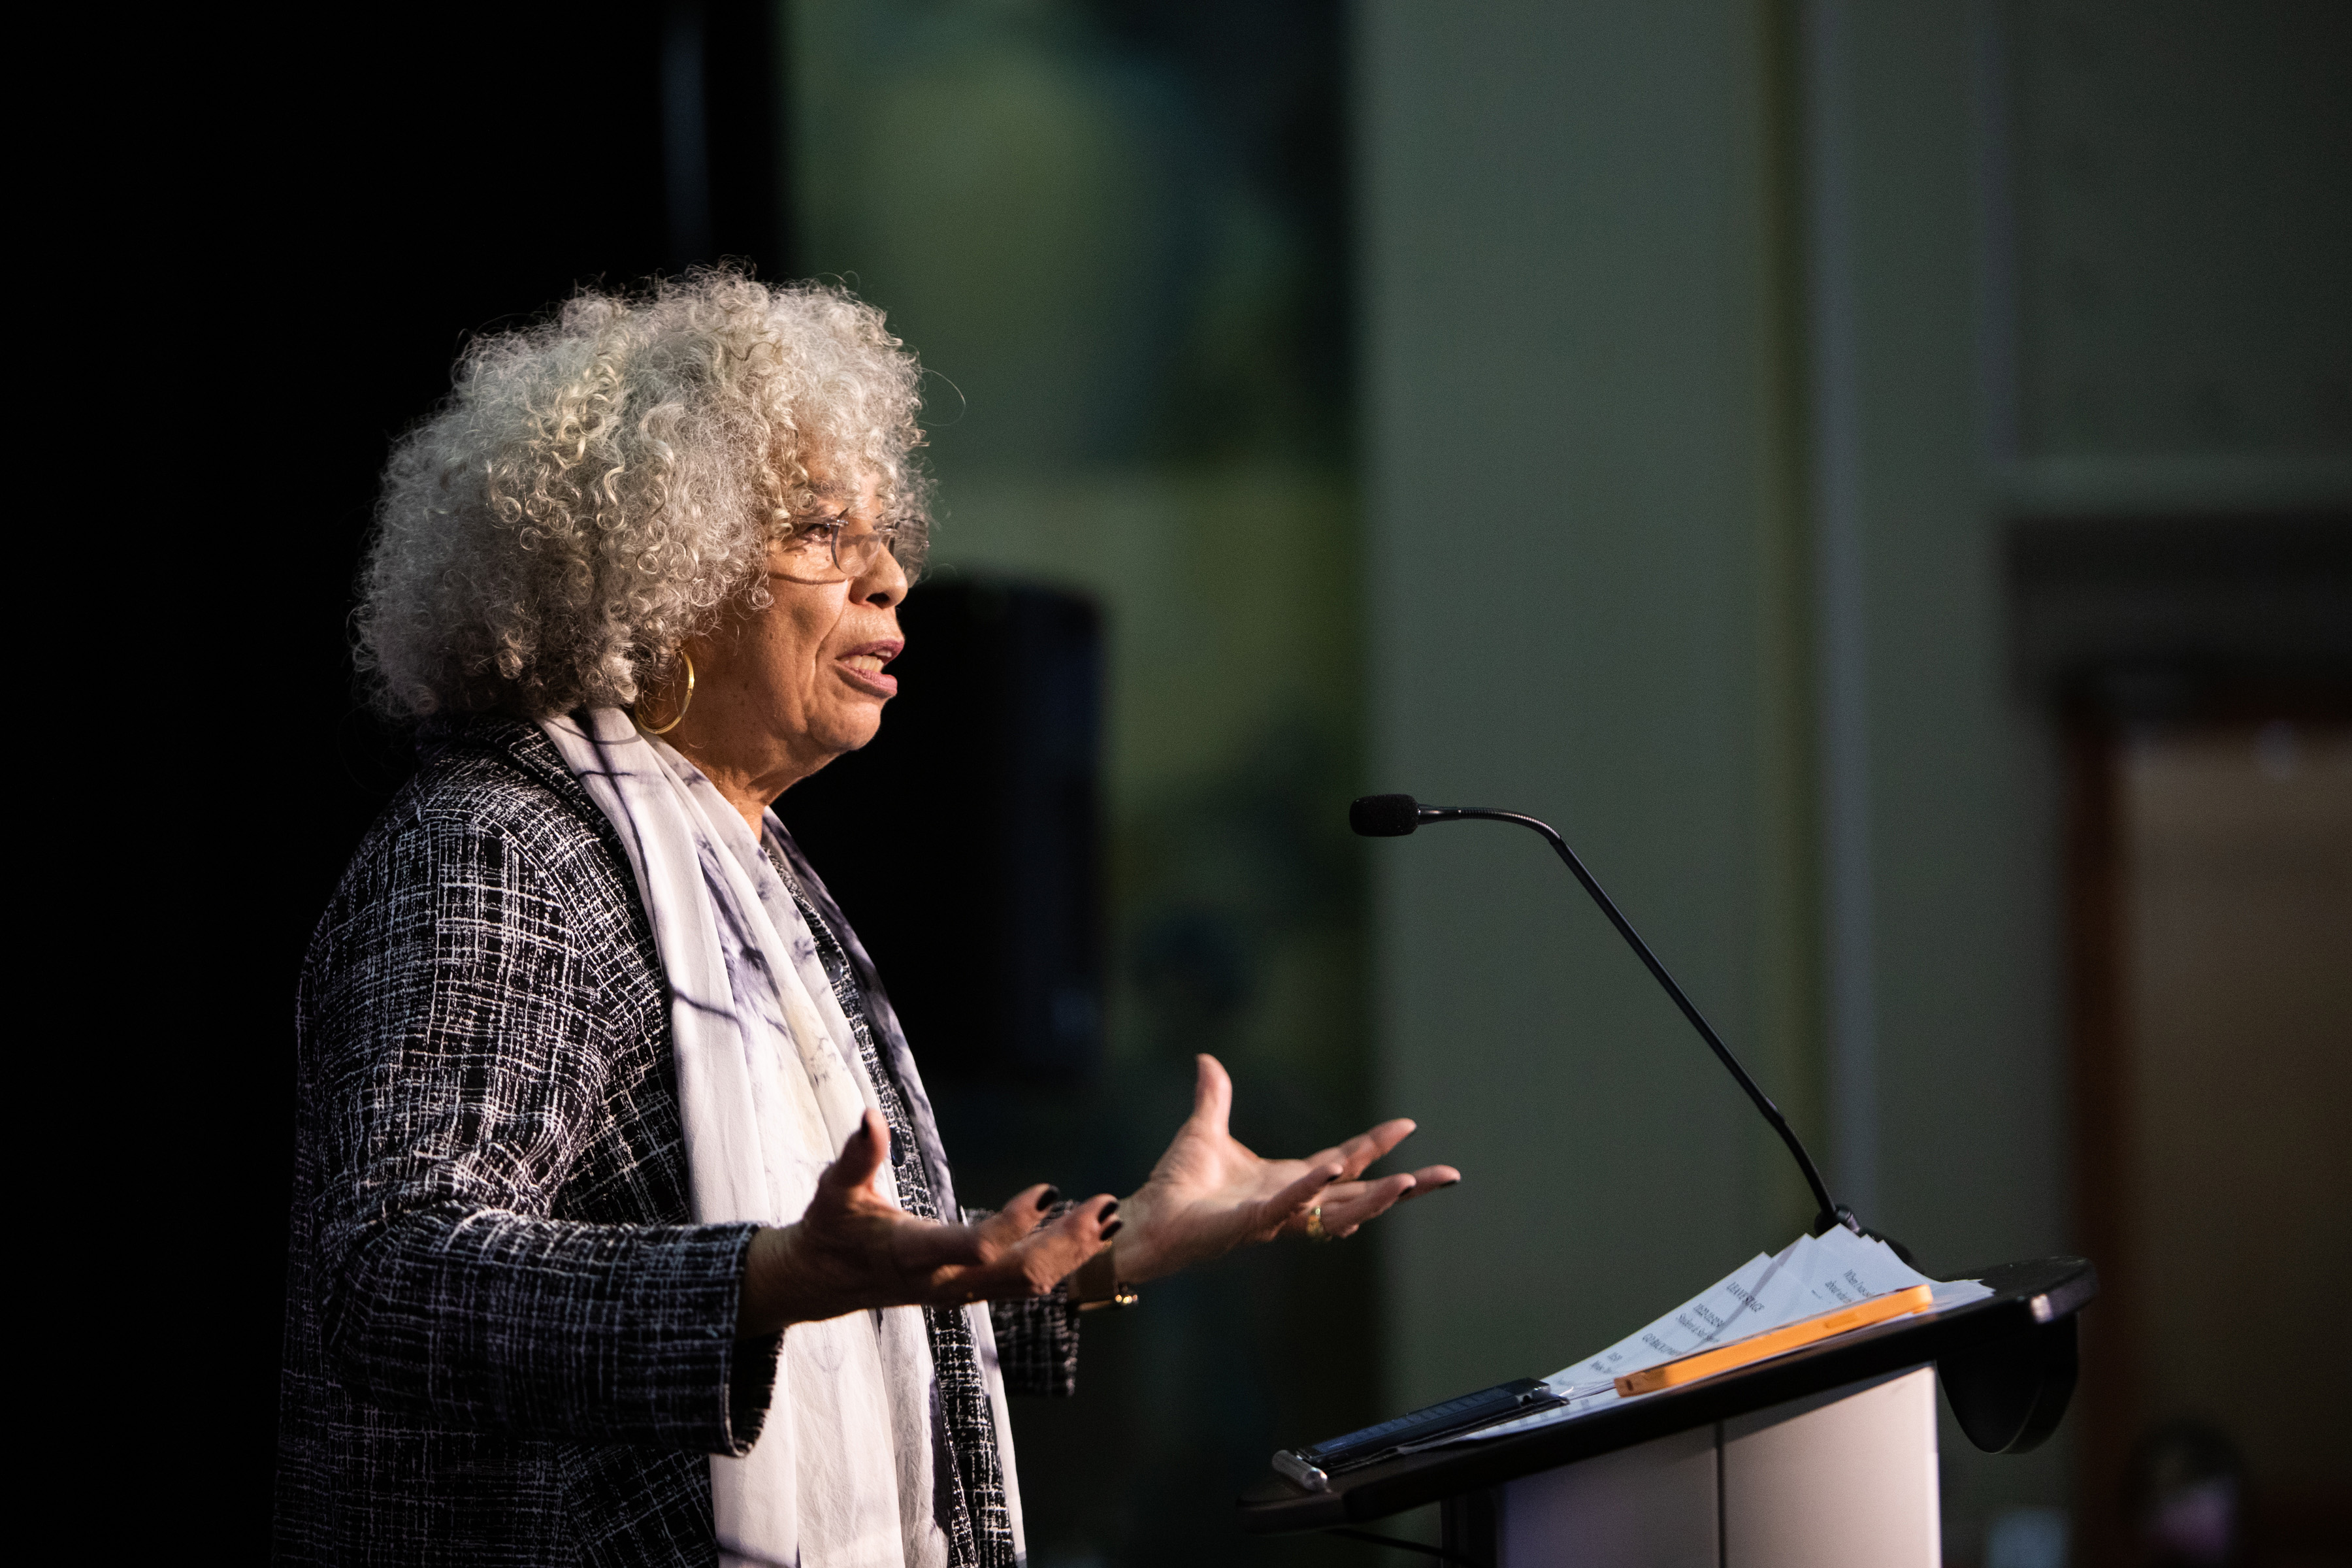 Keynote speaker Dr. Angela Y. Davis, feminist and writer, addressed the gathering at MIT’s annual celebration of the life and legacy of Dr. Martin Luther King Jr.